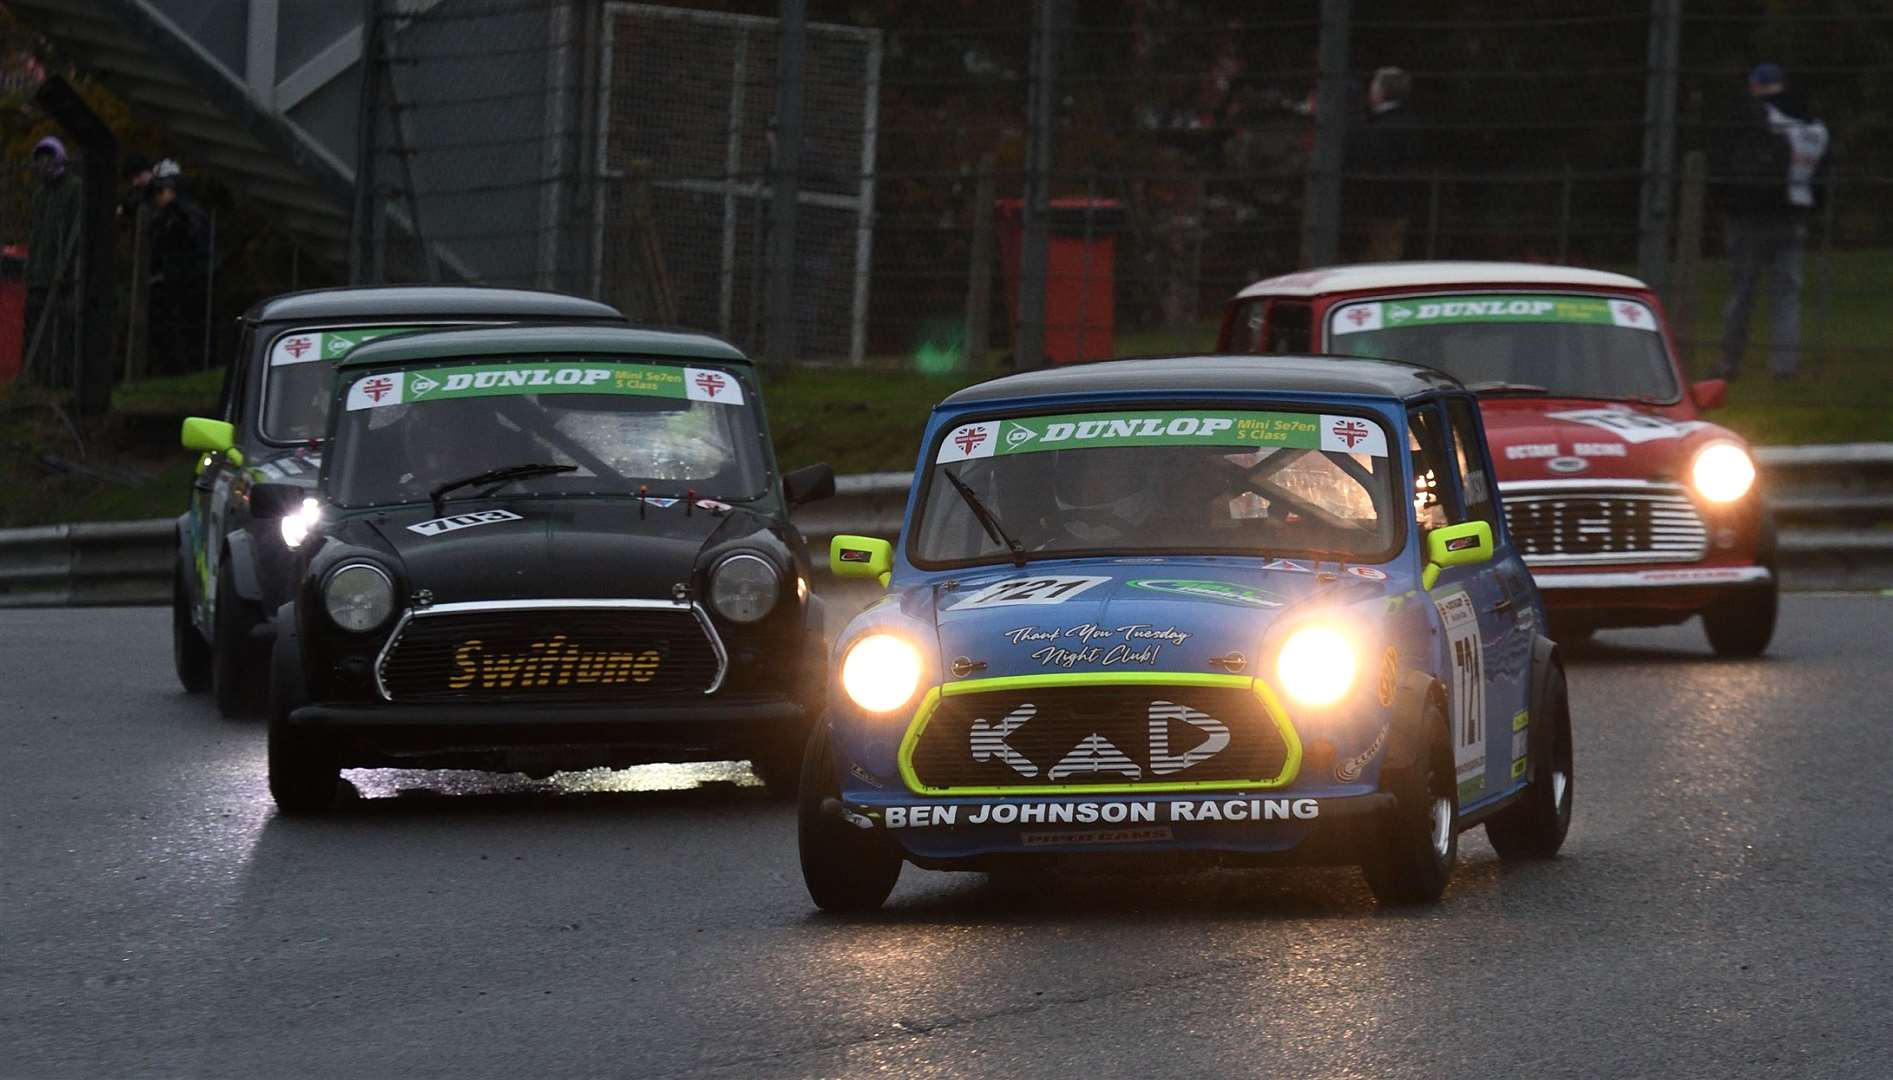 Ben Johnson (721), from Tunbridge Wells, finished a best of fifth in class in the Dunlop Mini Winter Challenge in his Mini Se7en